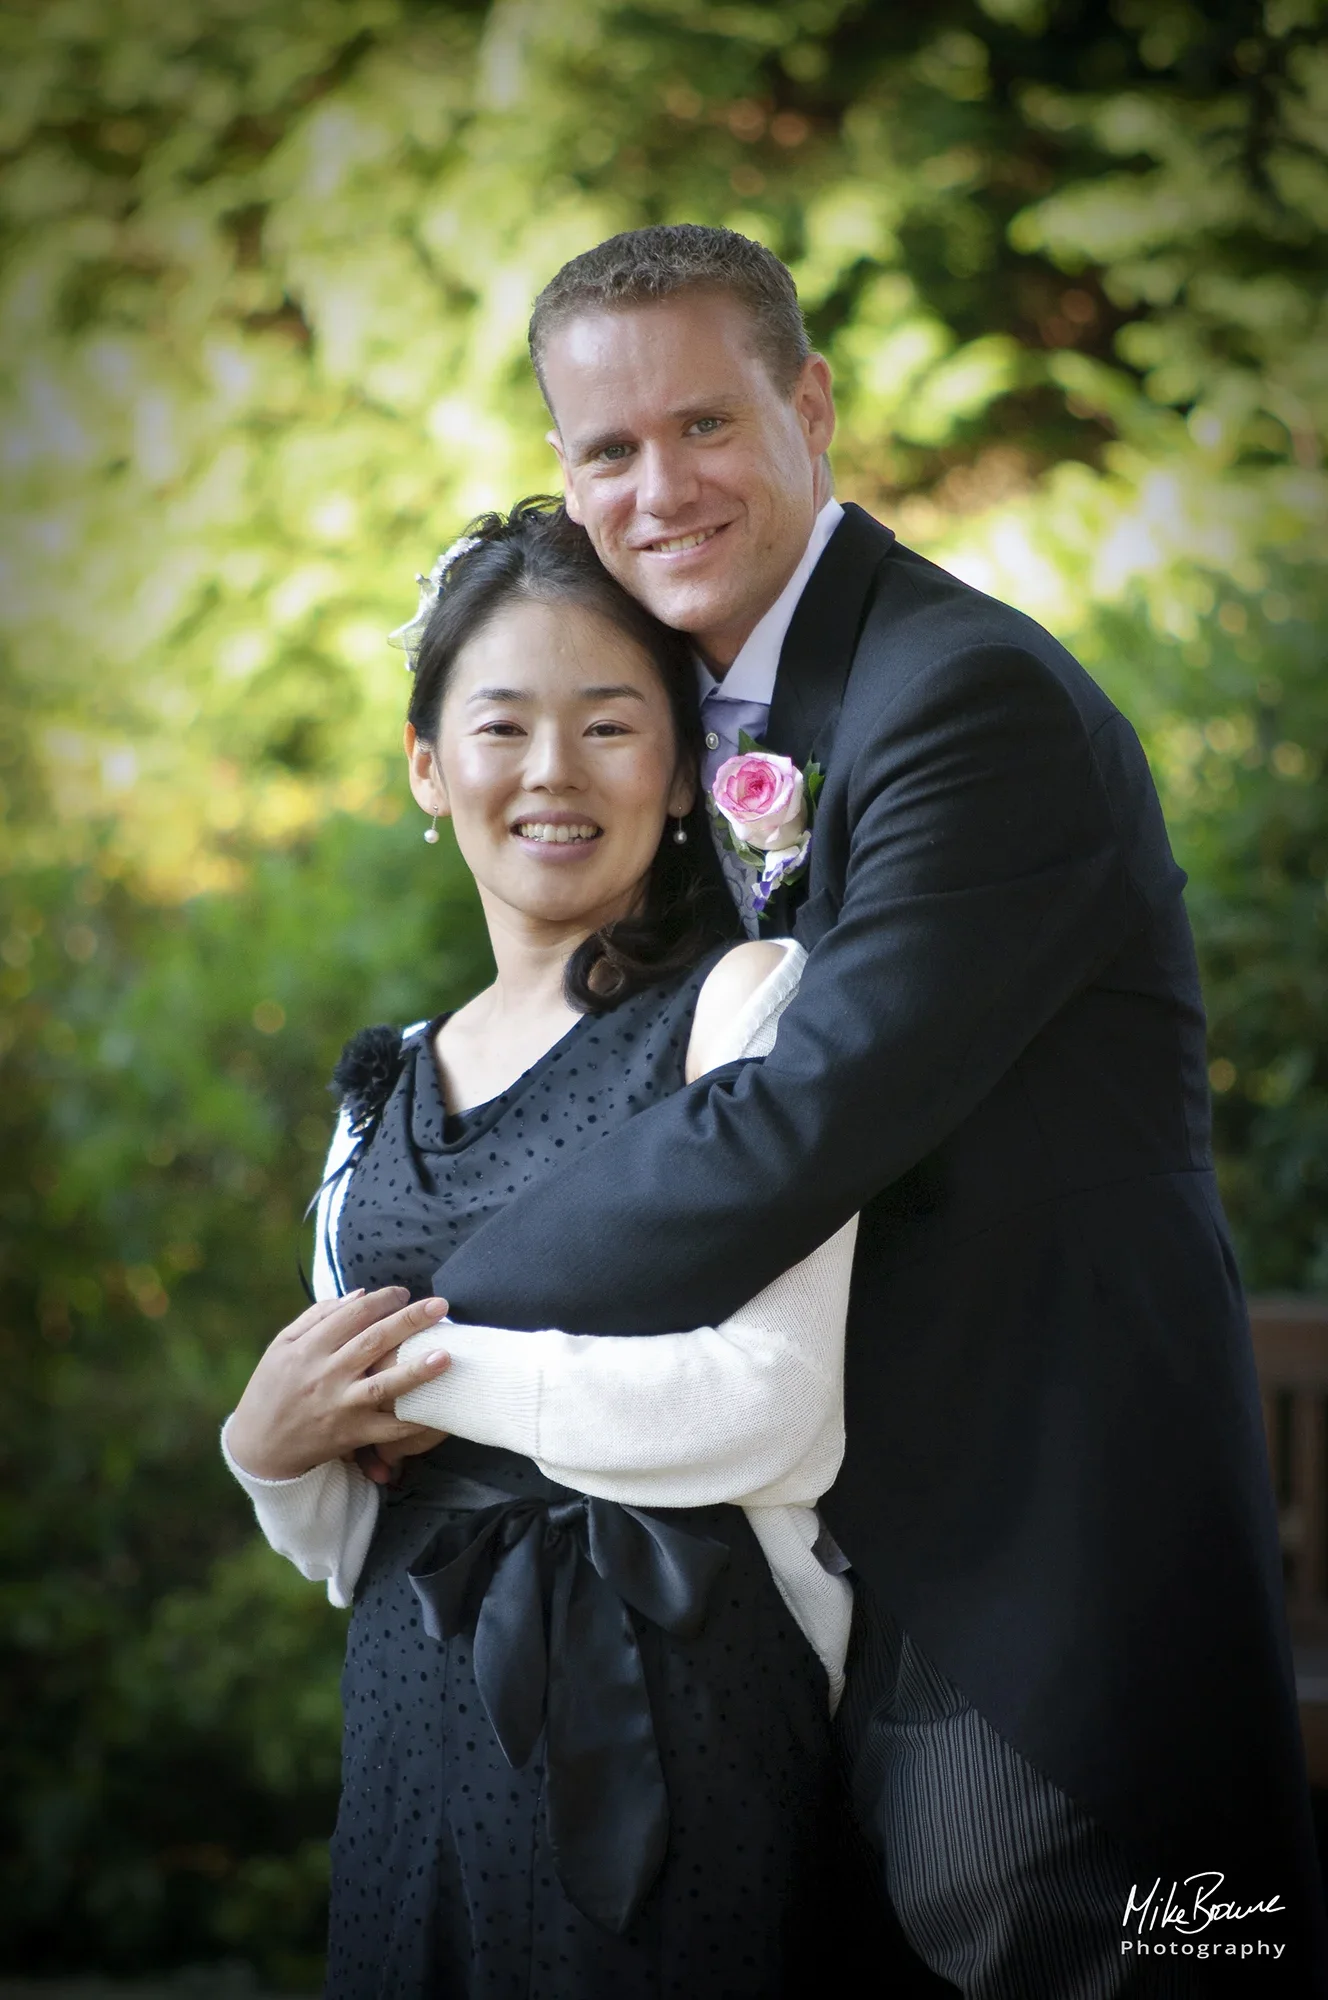 Bride and groom with pink button hole embracing in a garden